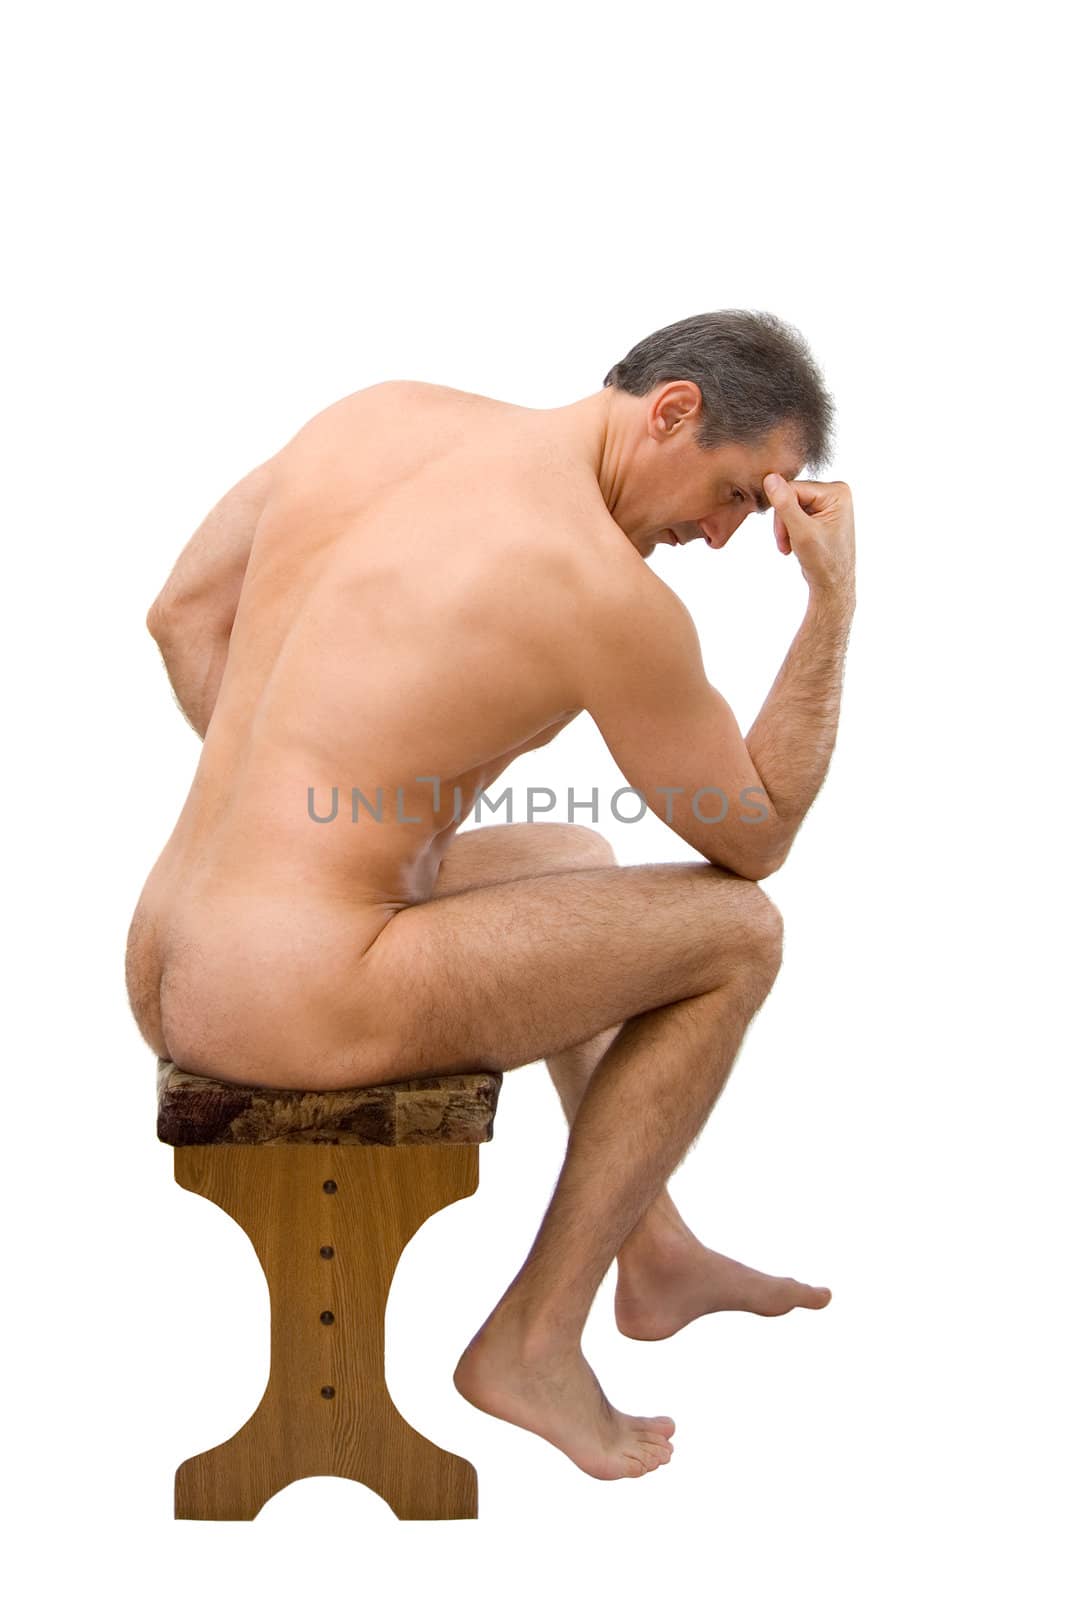 The man sits on a chair in a thoughtful pose
